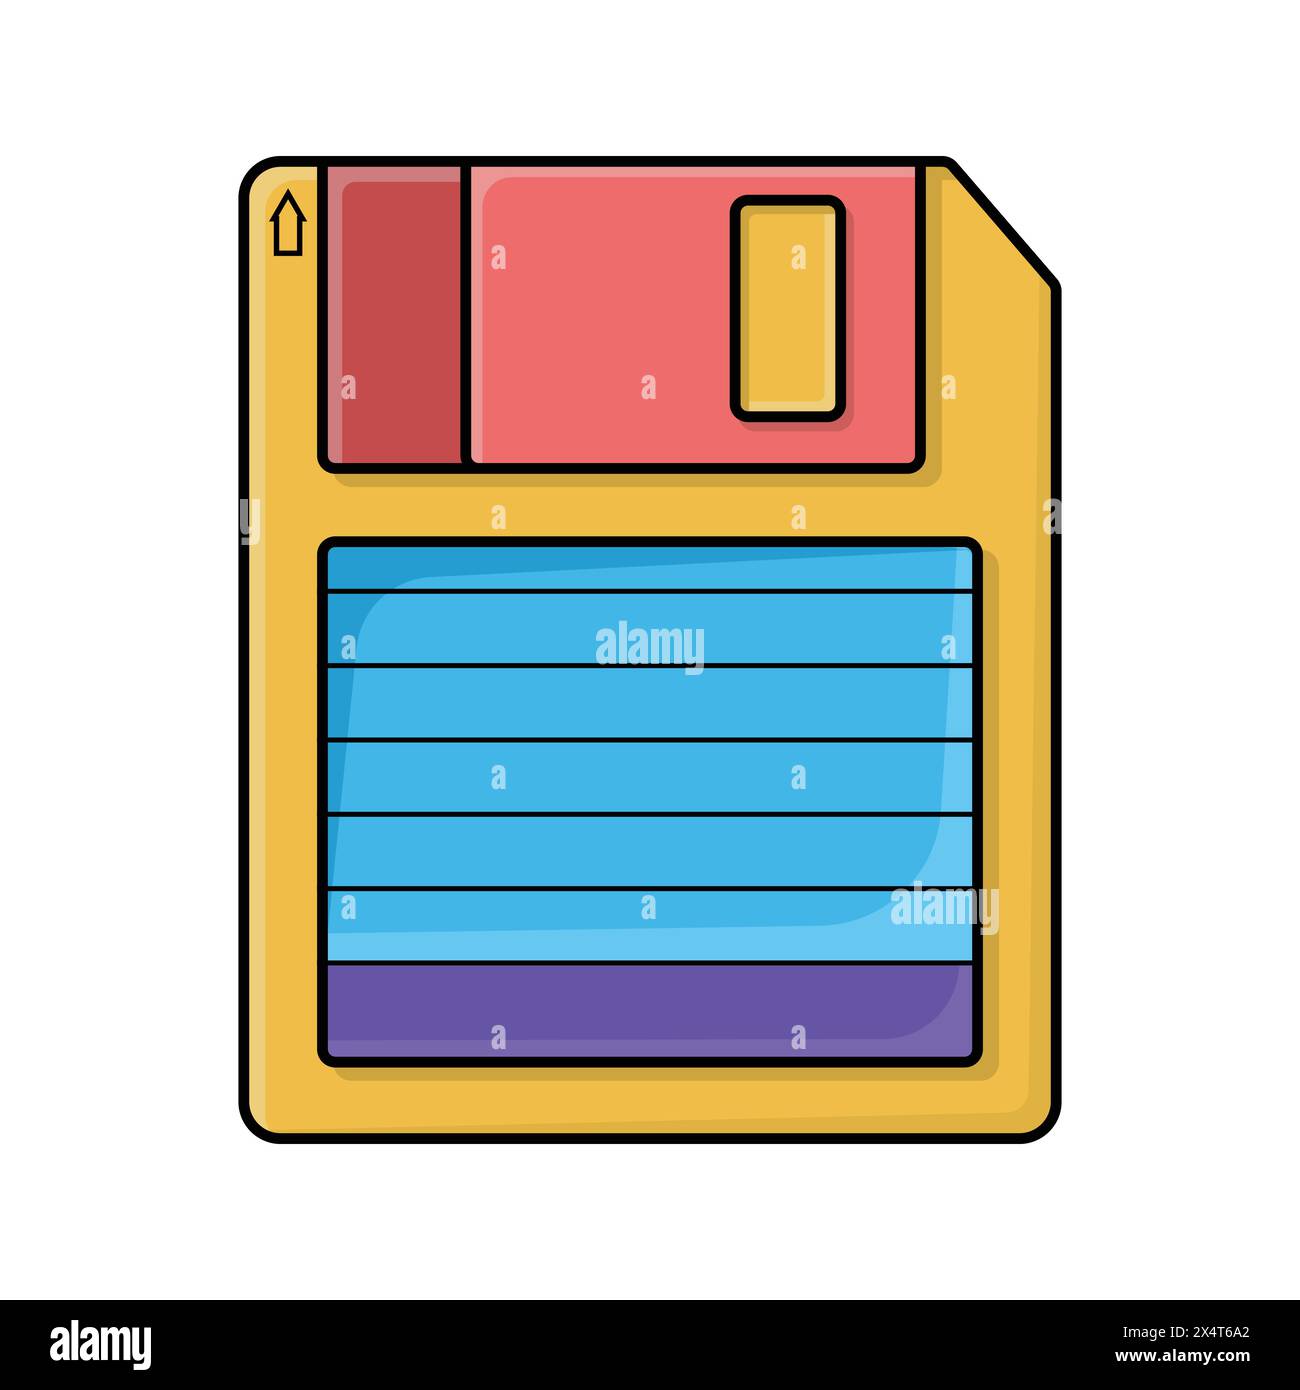 Retro floppy disk icon image vector illustration in yellow and blue color. Technology design element and concept Stock Vector